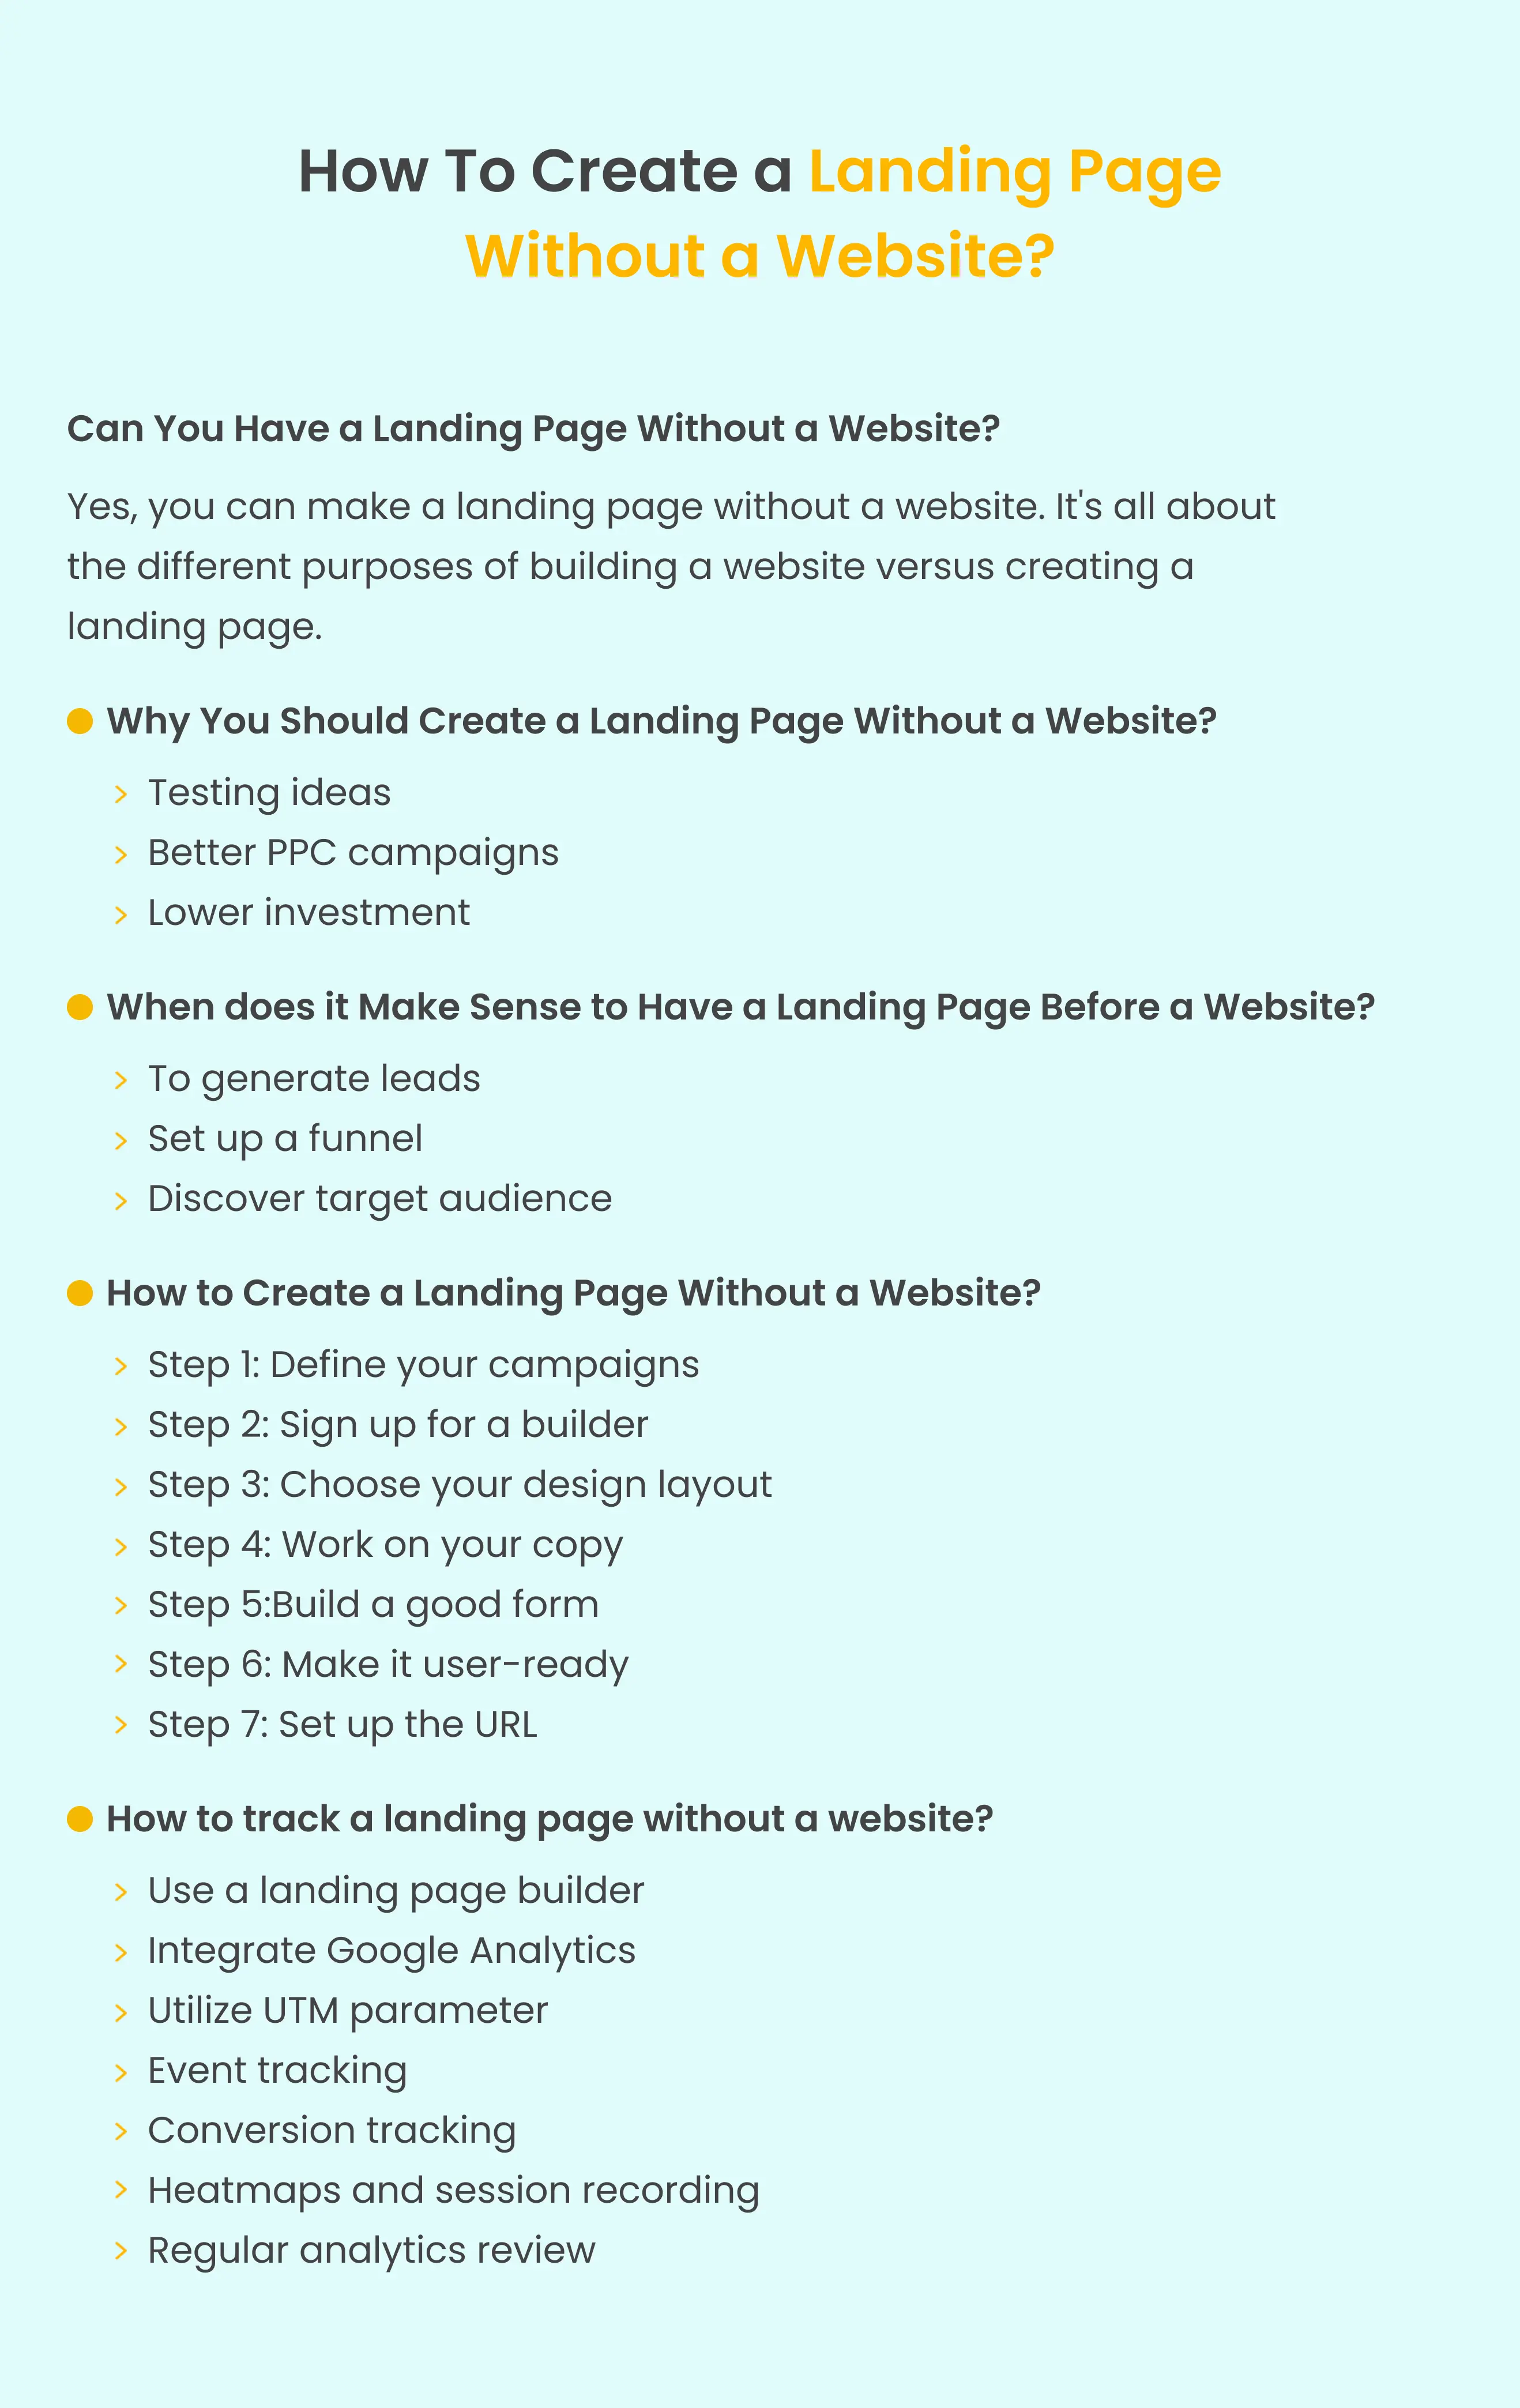 how-to-create-a-landing-page-without-a-website-summary.webp